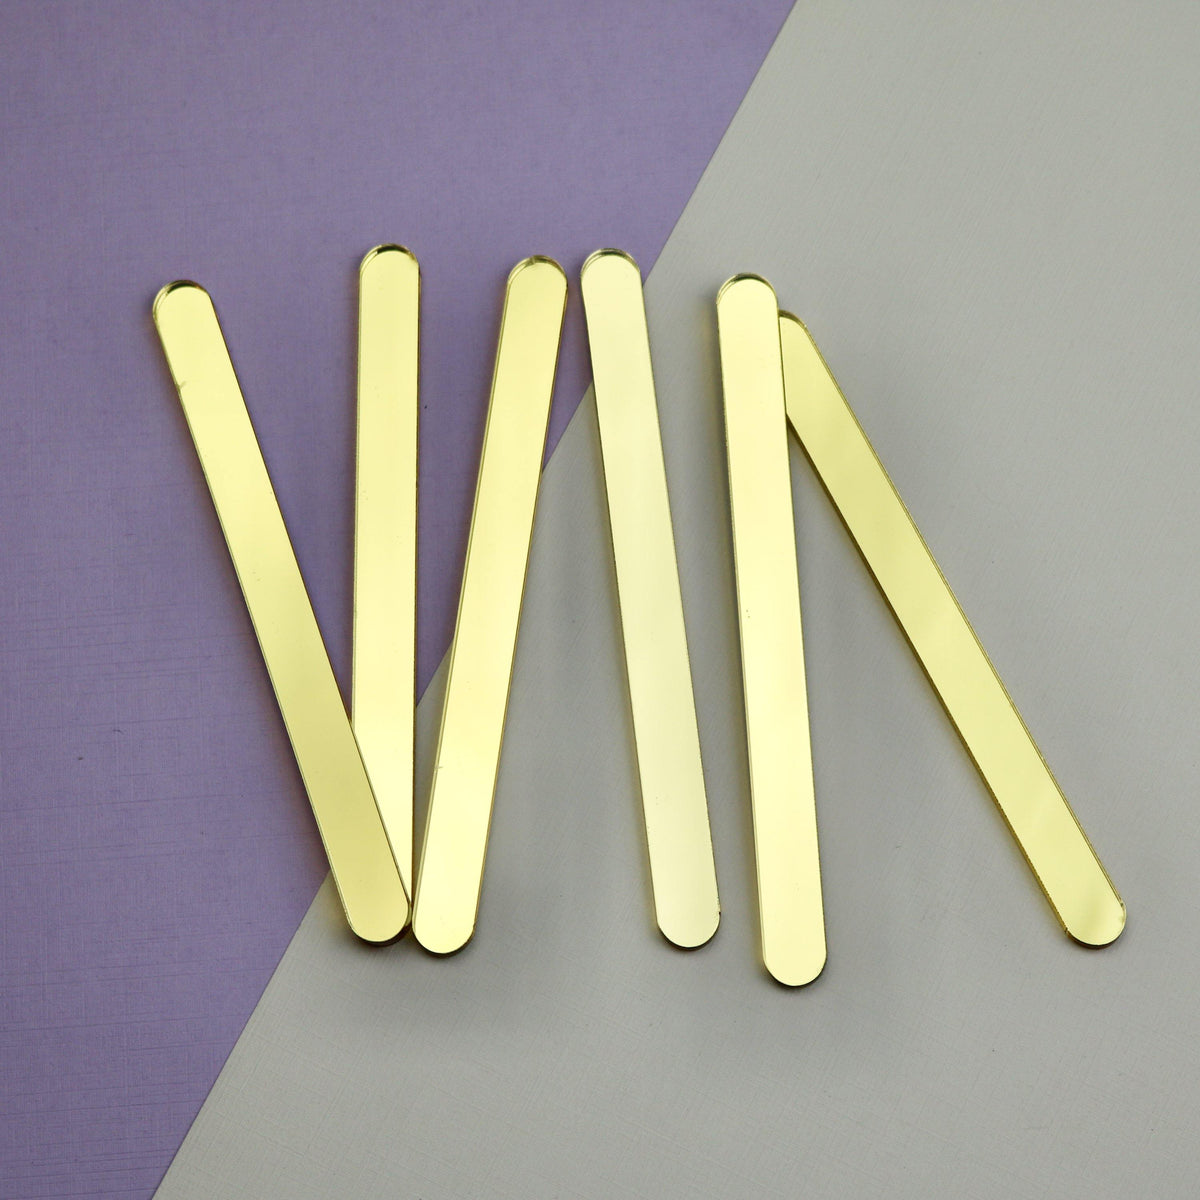 Acrylic Sequin Cakesicle Sticks – Bean and Butter